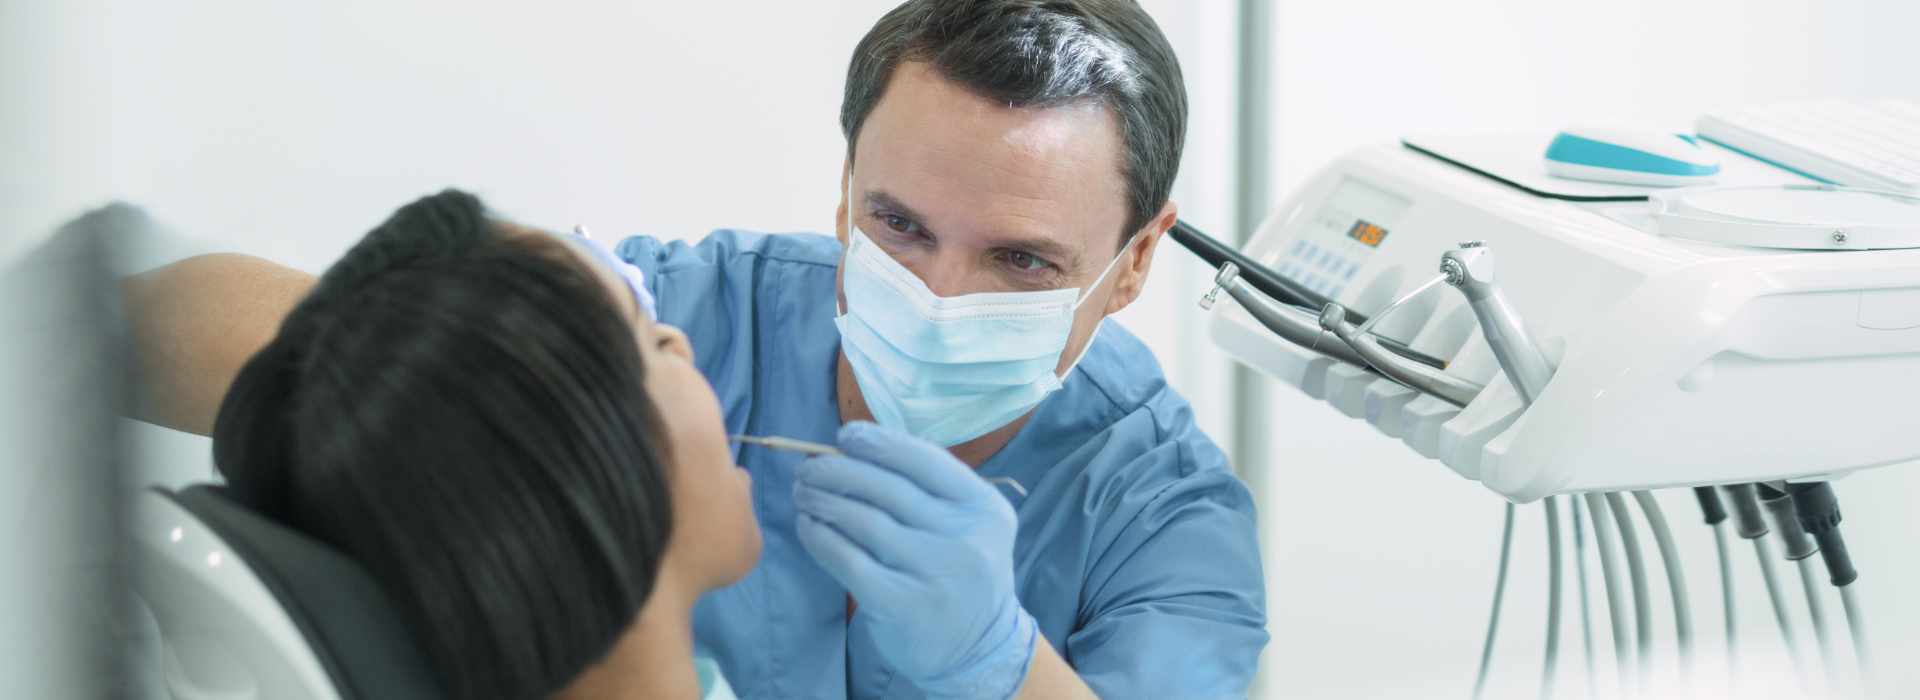 A woman is having dental extraction.